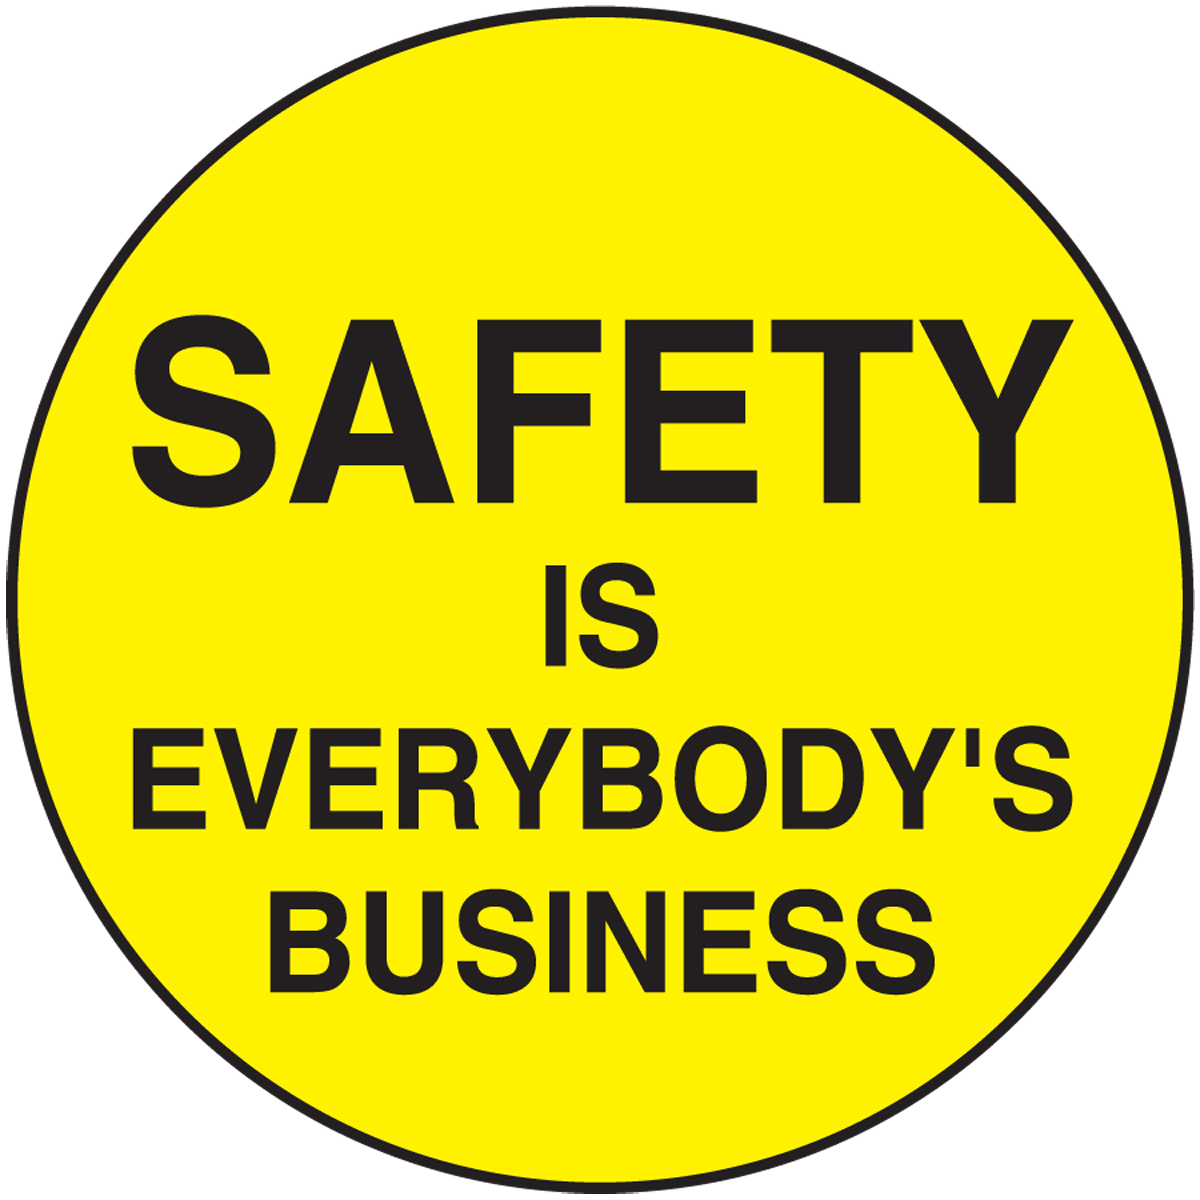 Life safety is. Стикеры Safety. Safety is first наклейка. Safety precautions. Change is a Team effort надпись.